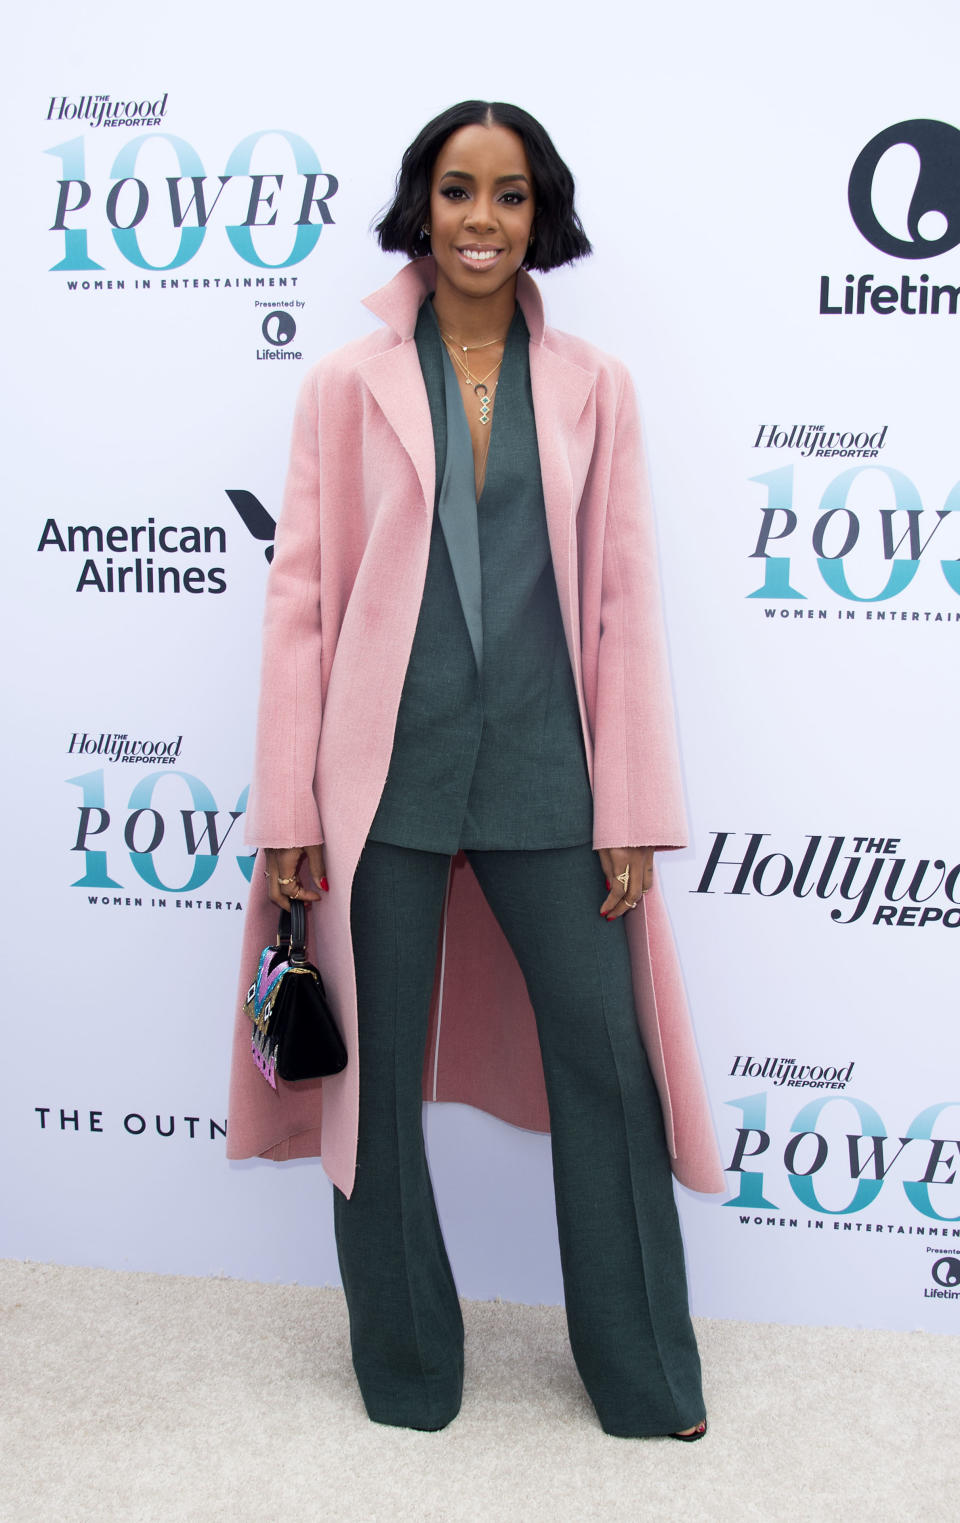 Recording artist Kelly Rowland attends the Hollywood Reporter's 25th Annual Women In Entertainment Breakfast. She wears a dark green suit with a pink coat over the top.